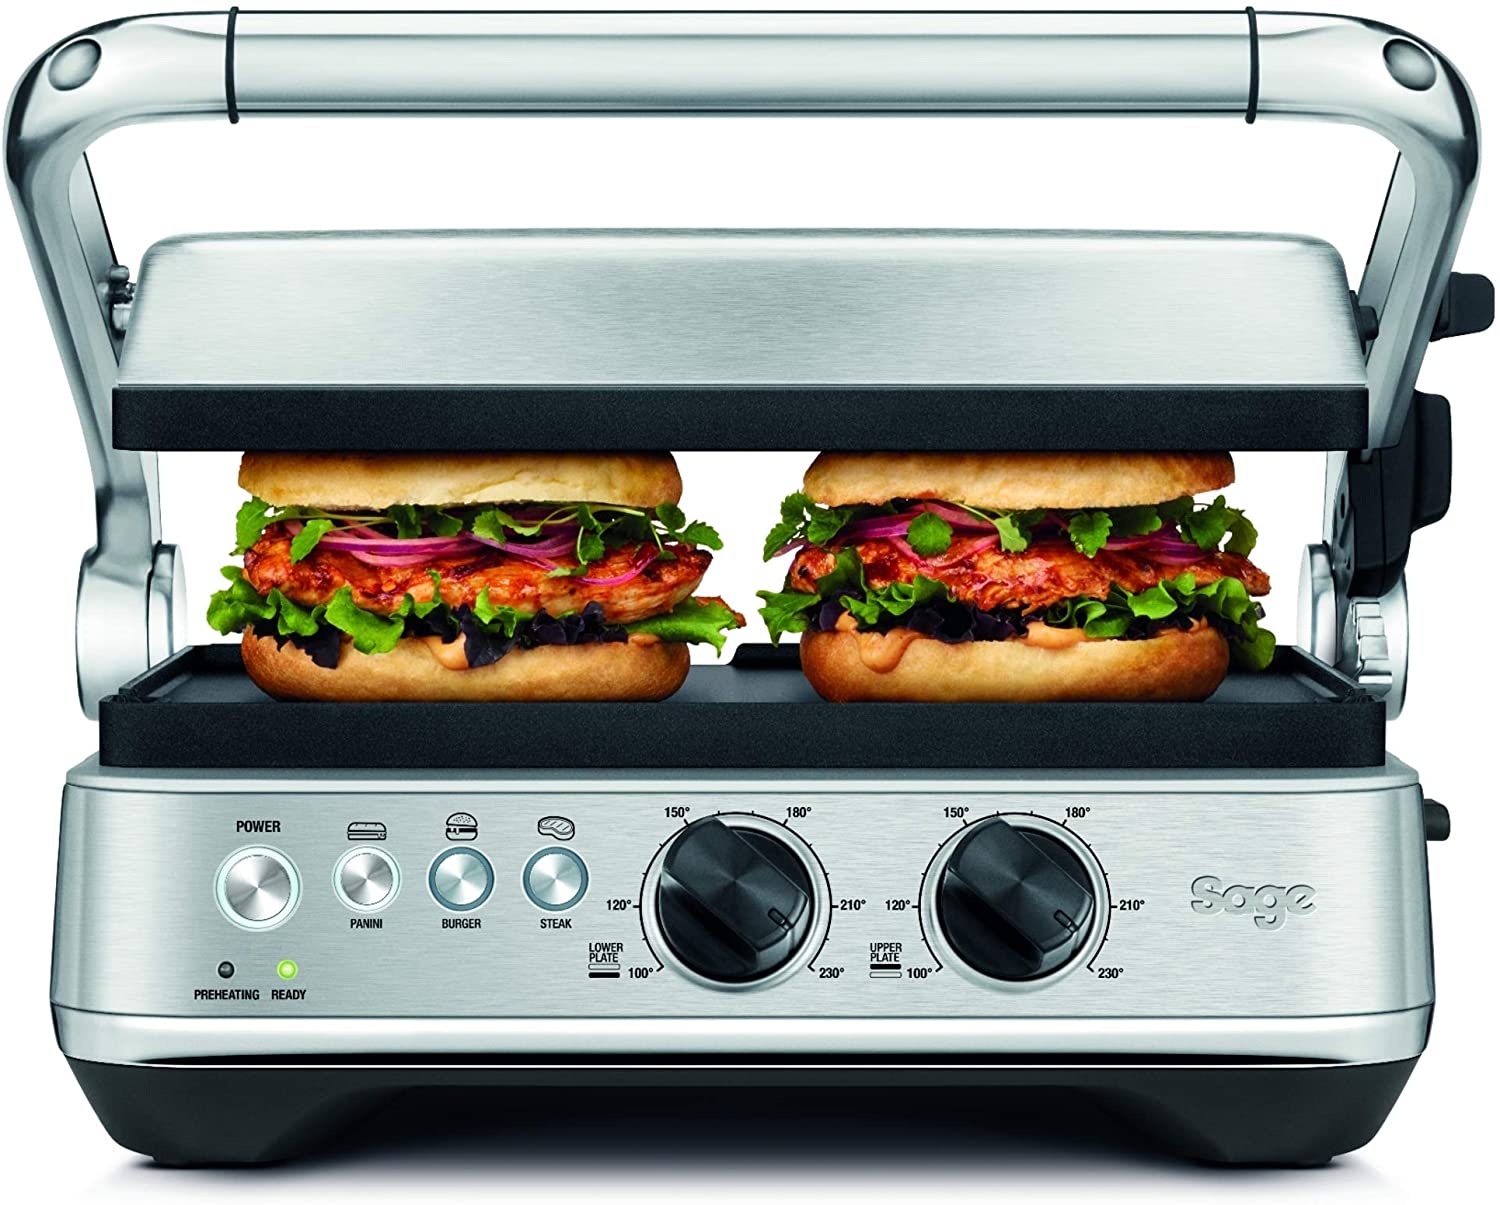 Sage Appliances SGR700 the BBQ and Press, Grill, Brushed Stainless Steel